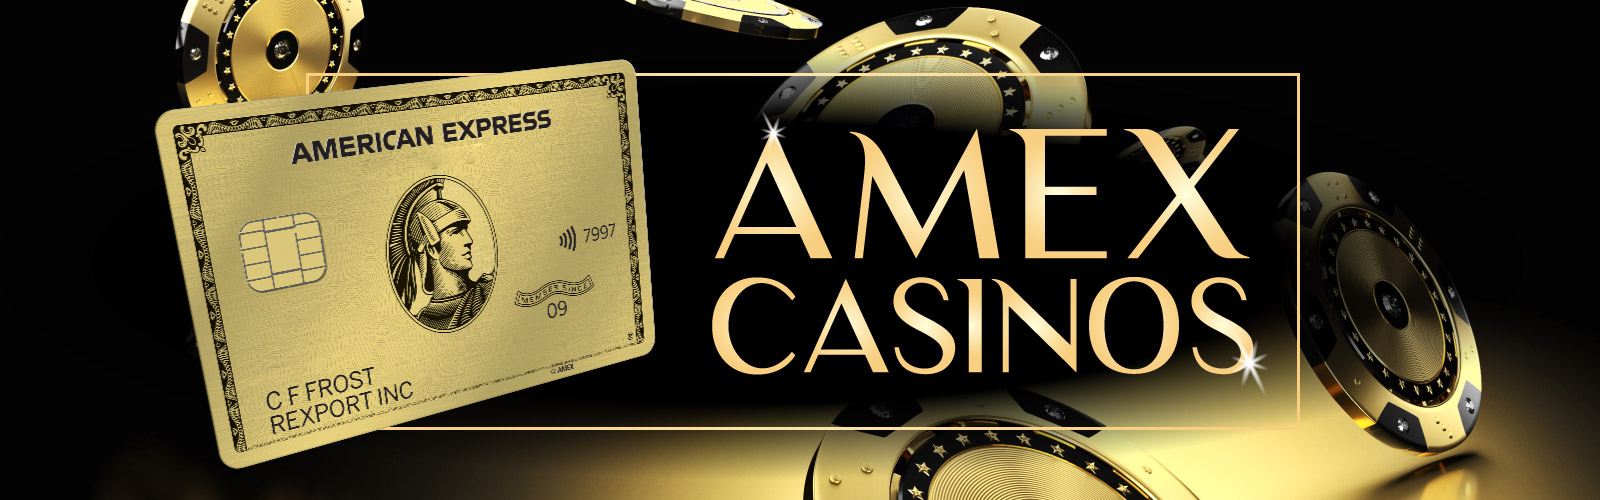 Online casinos that accept american express credit cards